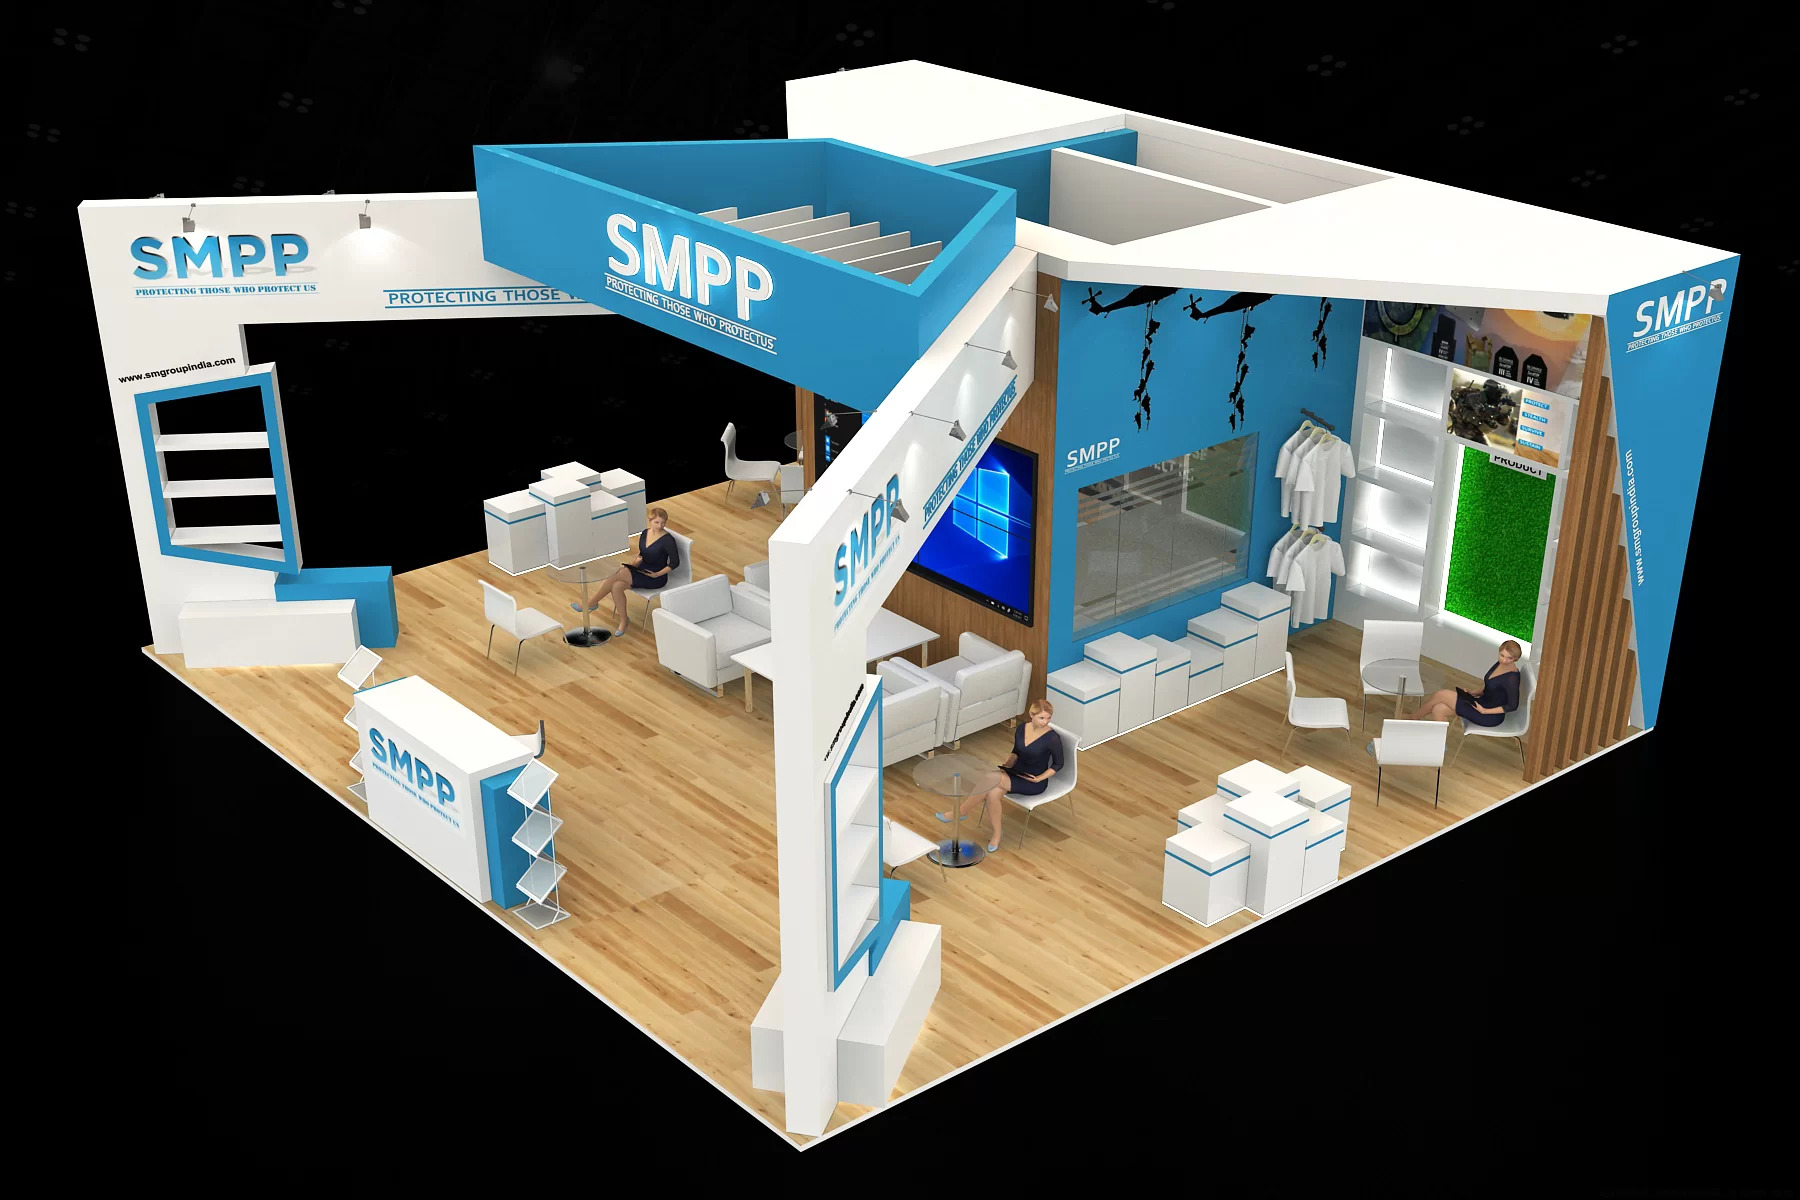 Exhibition Stand Design and Booth Builders in Bologna, Italy